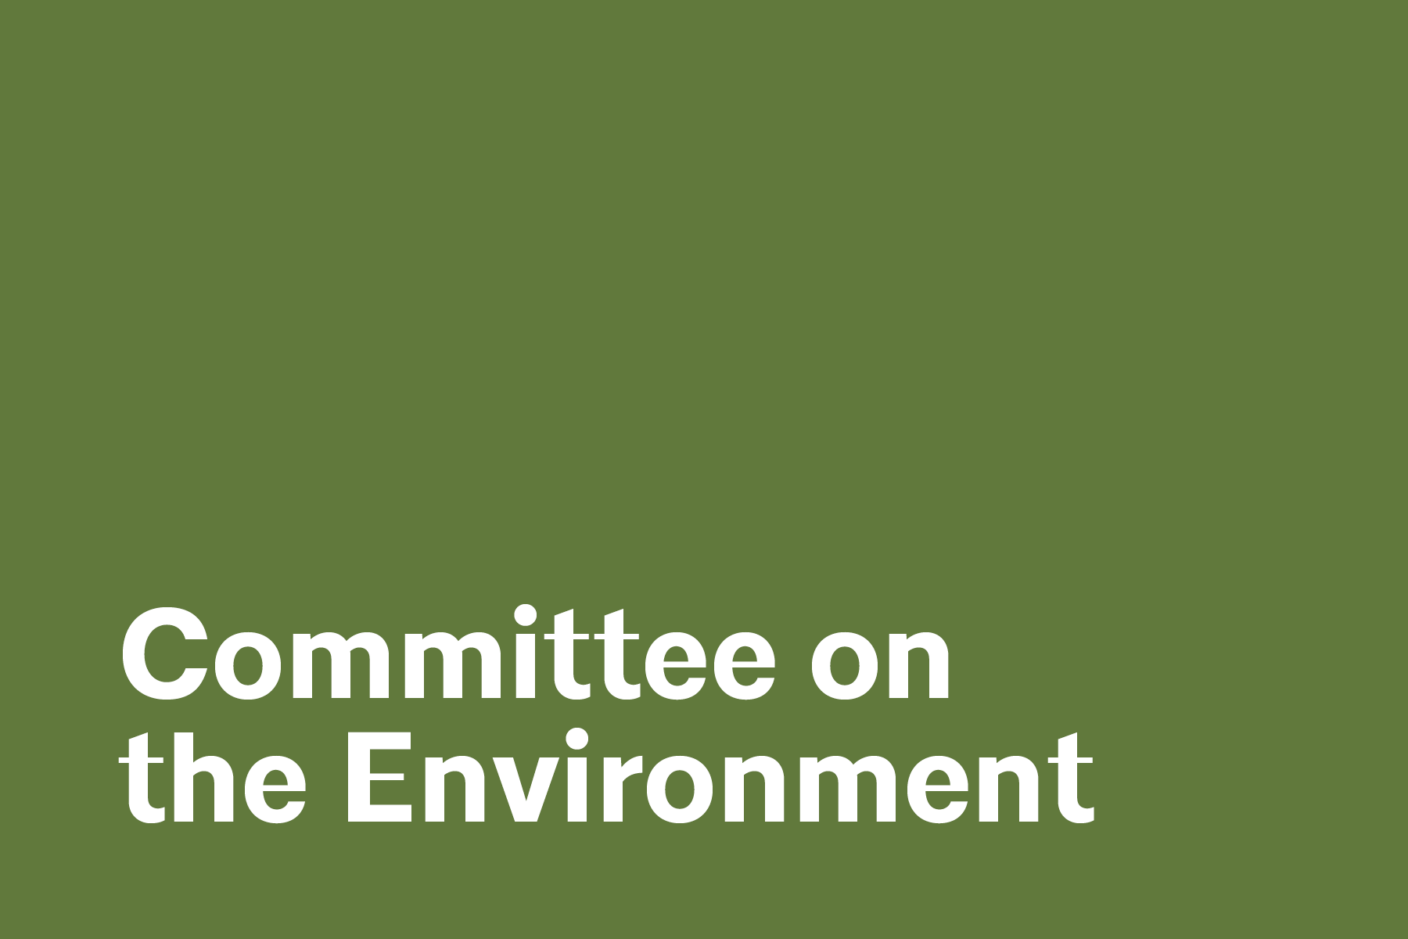 The Committee on the Environment (COTE) focuses on information and resource sharing among professionals in the local sustainable design community through monthly presentations, case studies, discussions and tours.